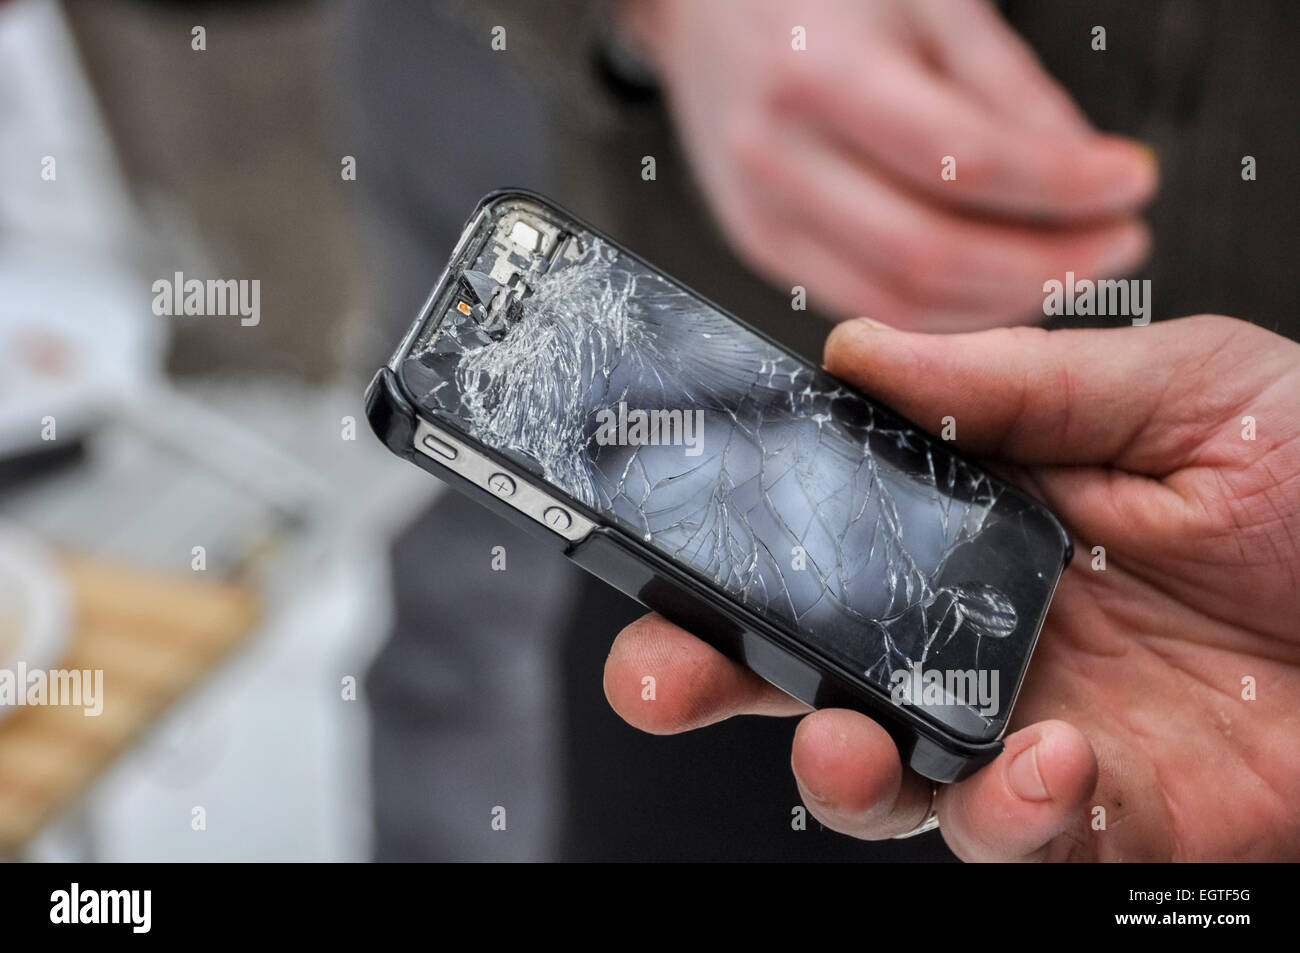 phone with a broken screen in a hand Stock Photo